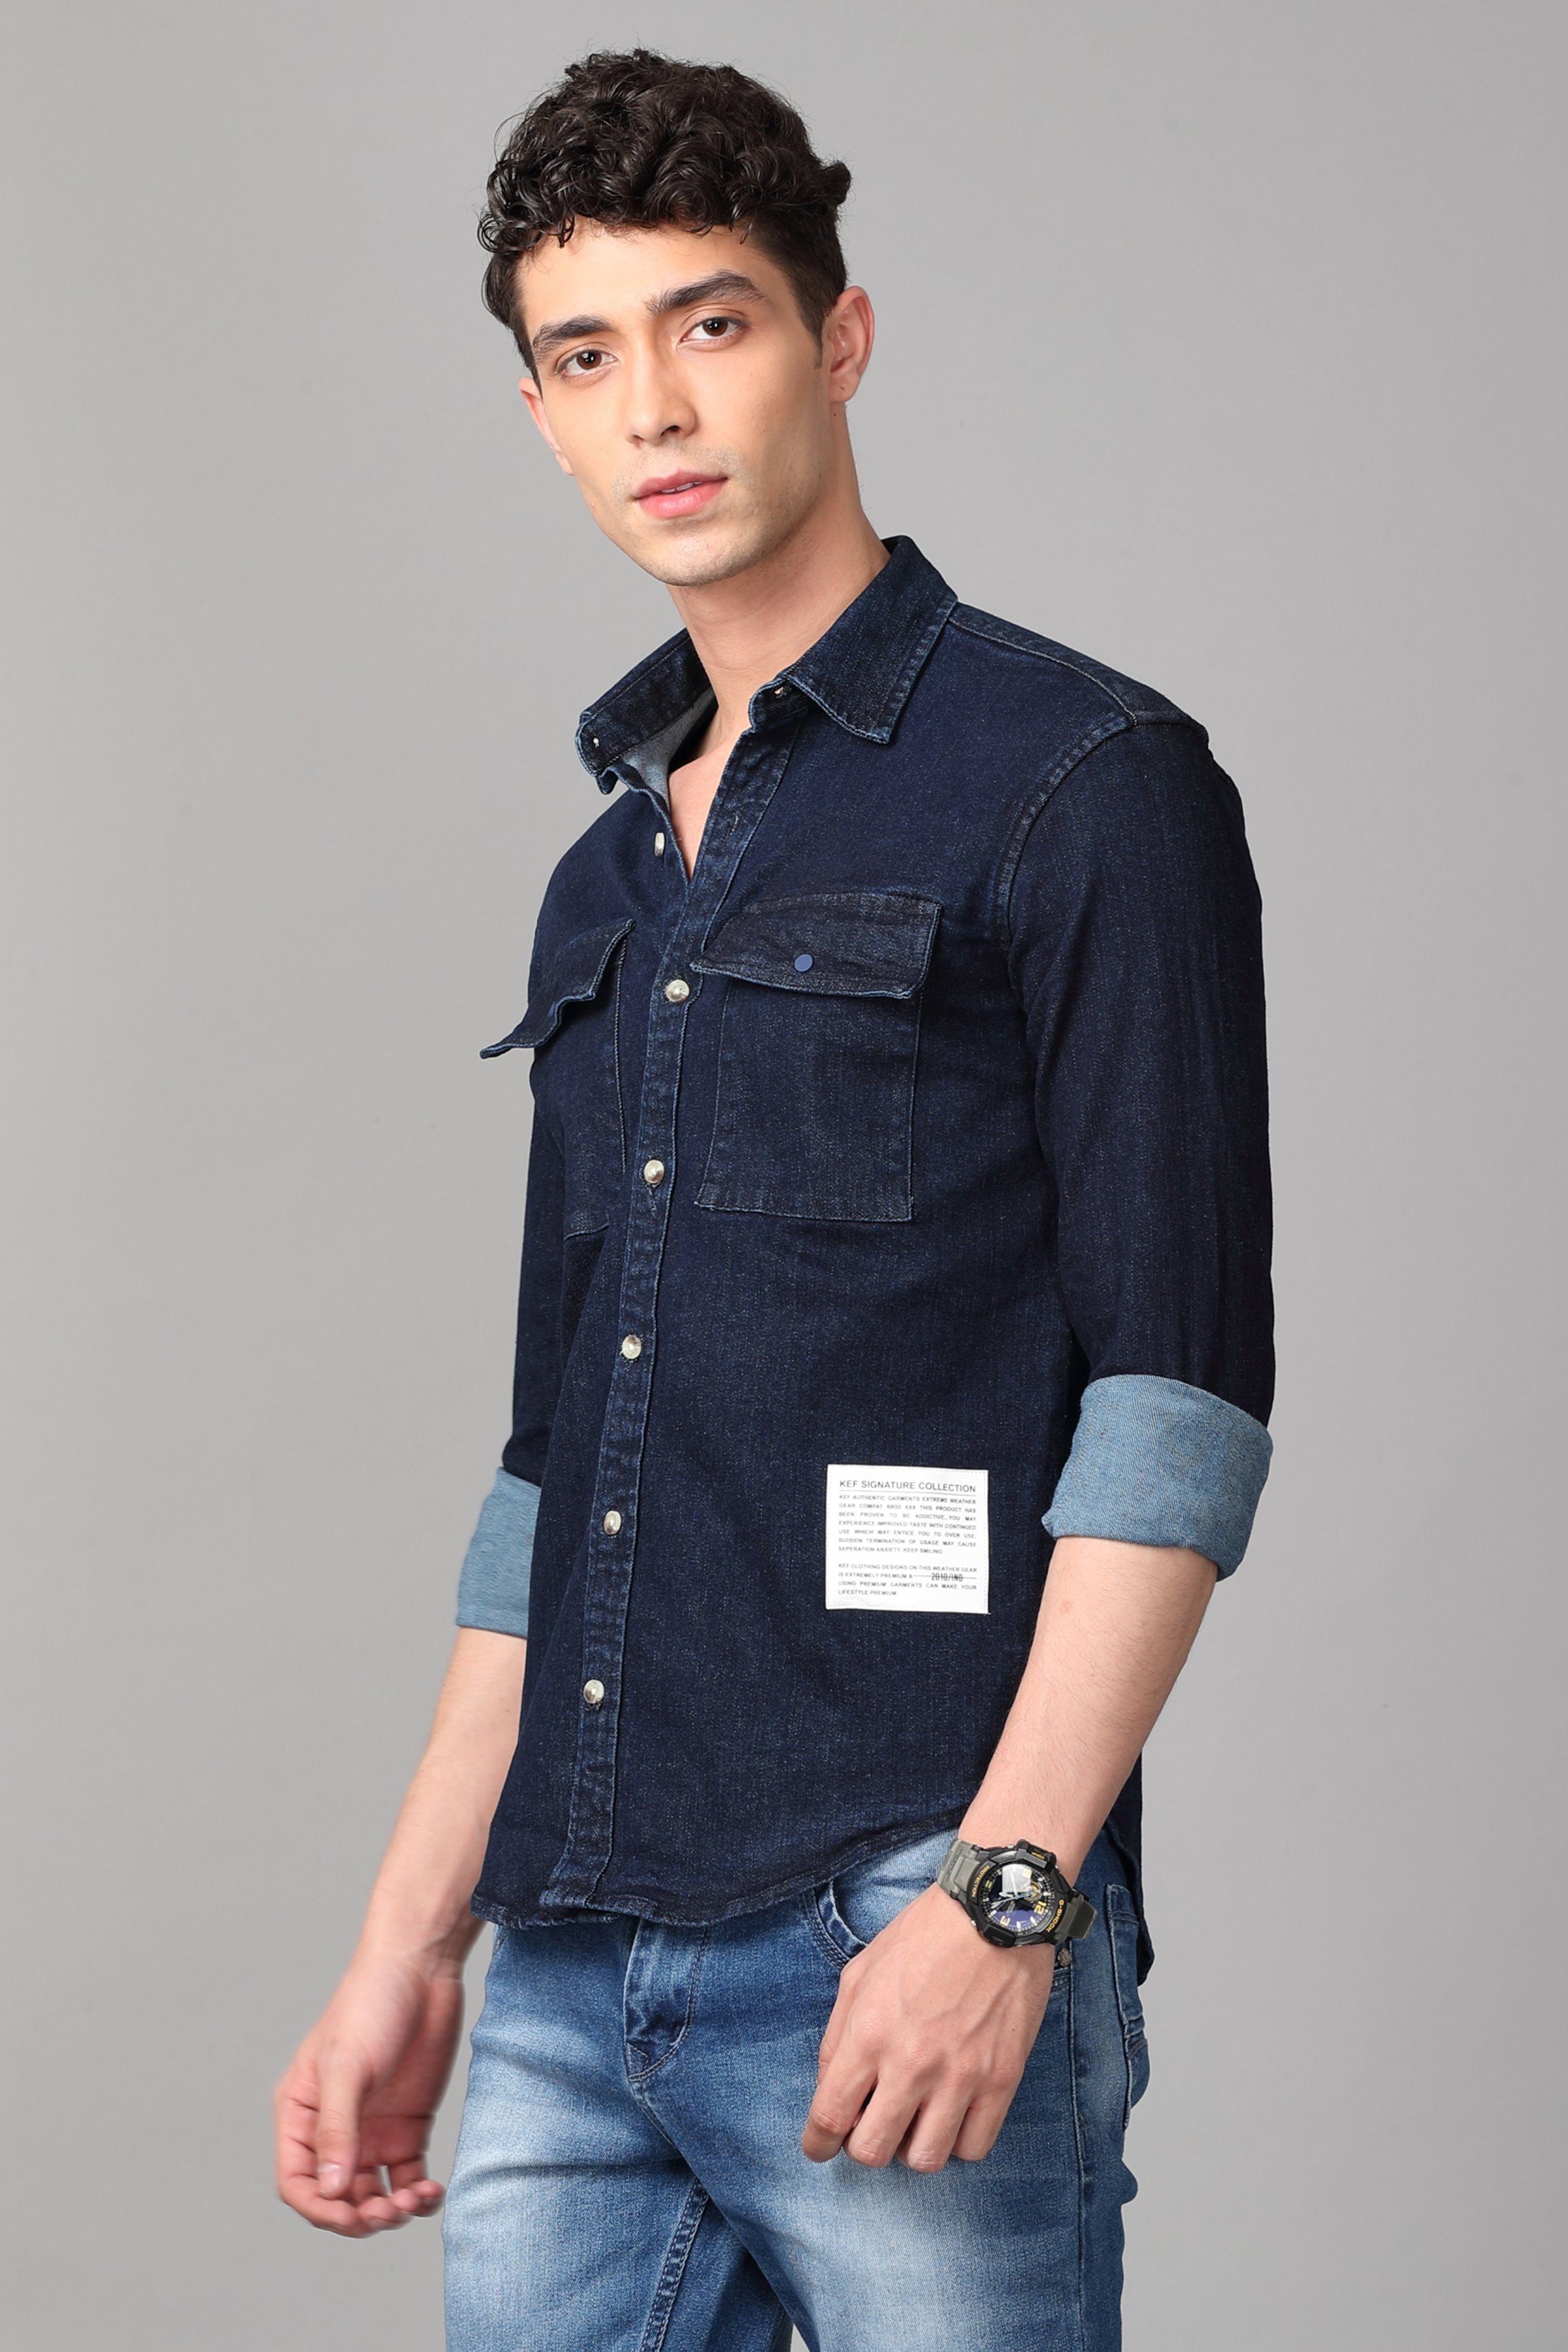 Double Pocket Printed Blue Denim Shirt in Bangalore at best price by Kef  Clothing - Justdial